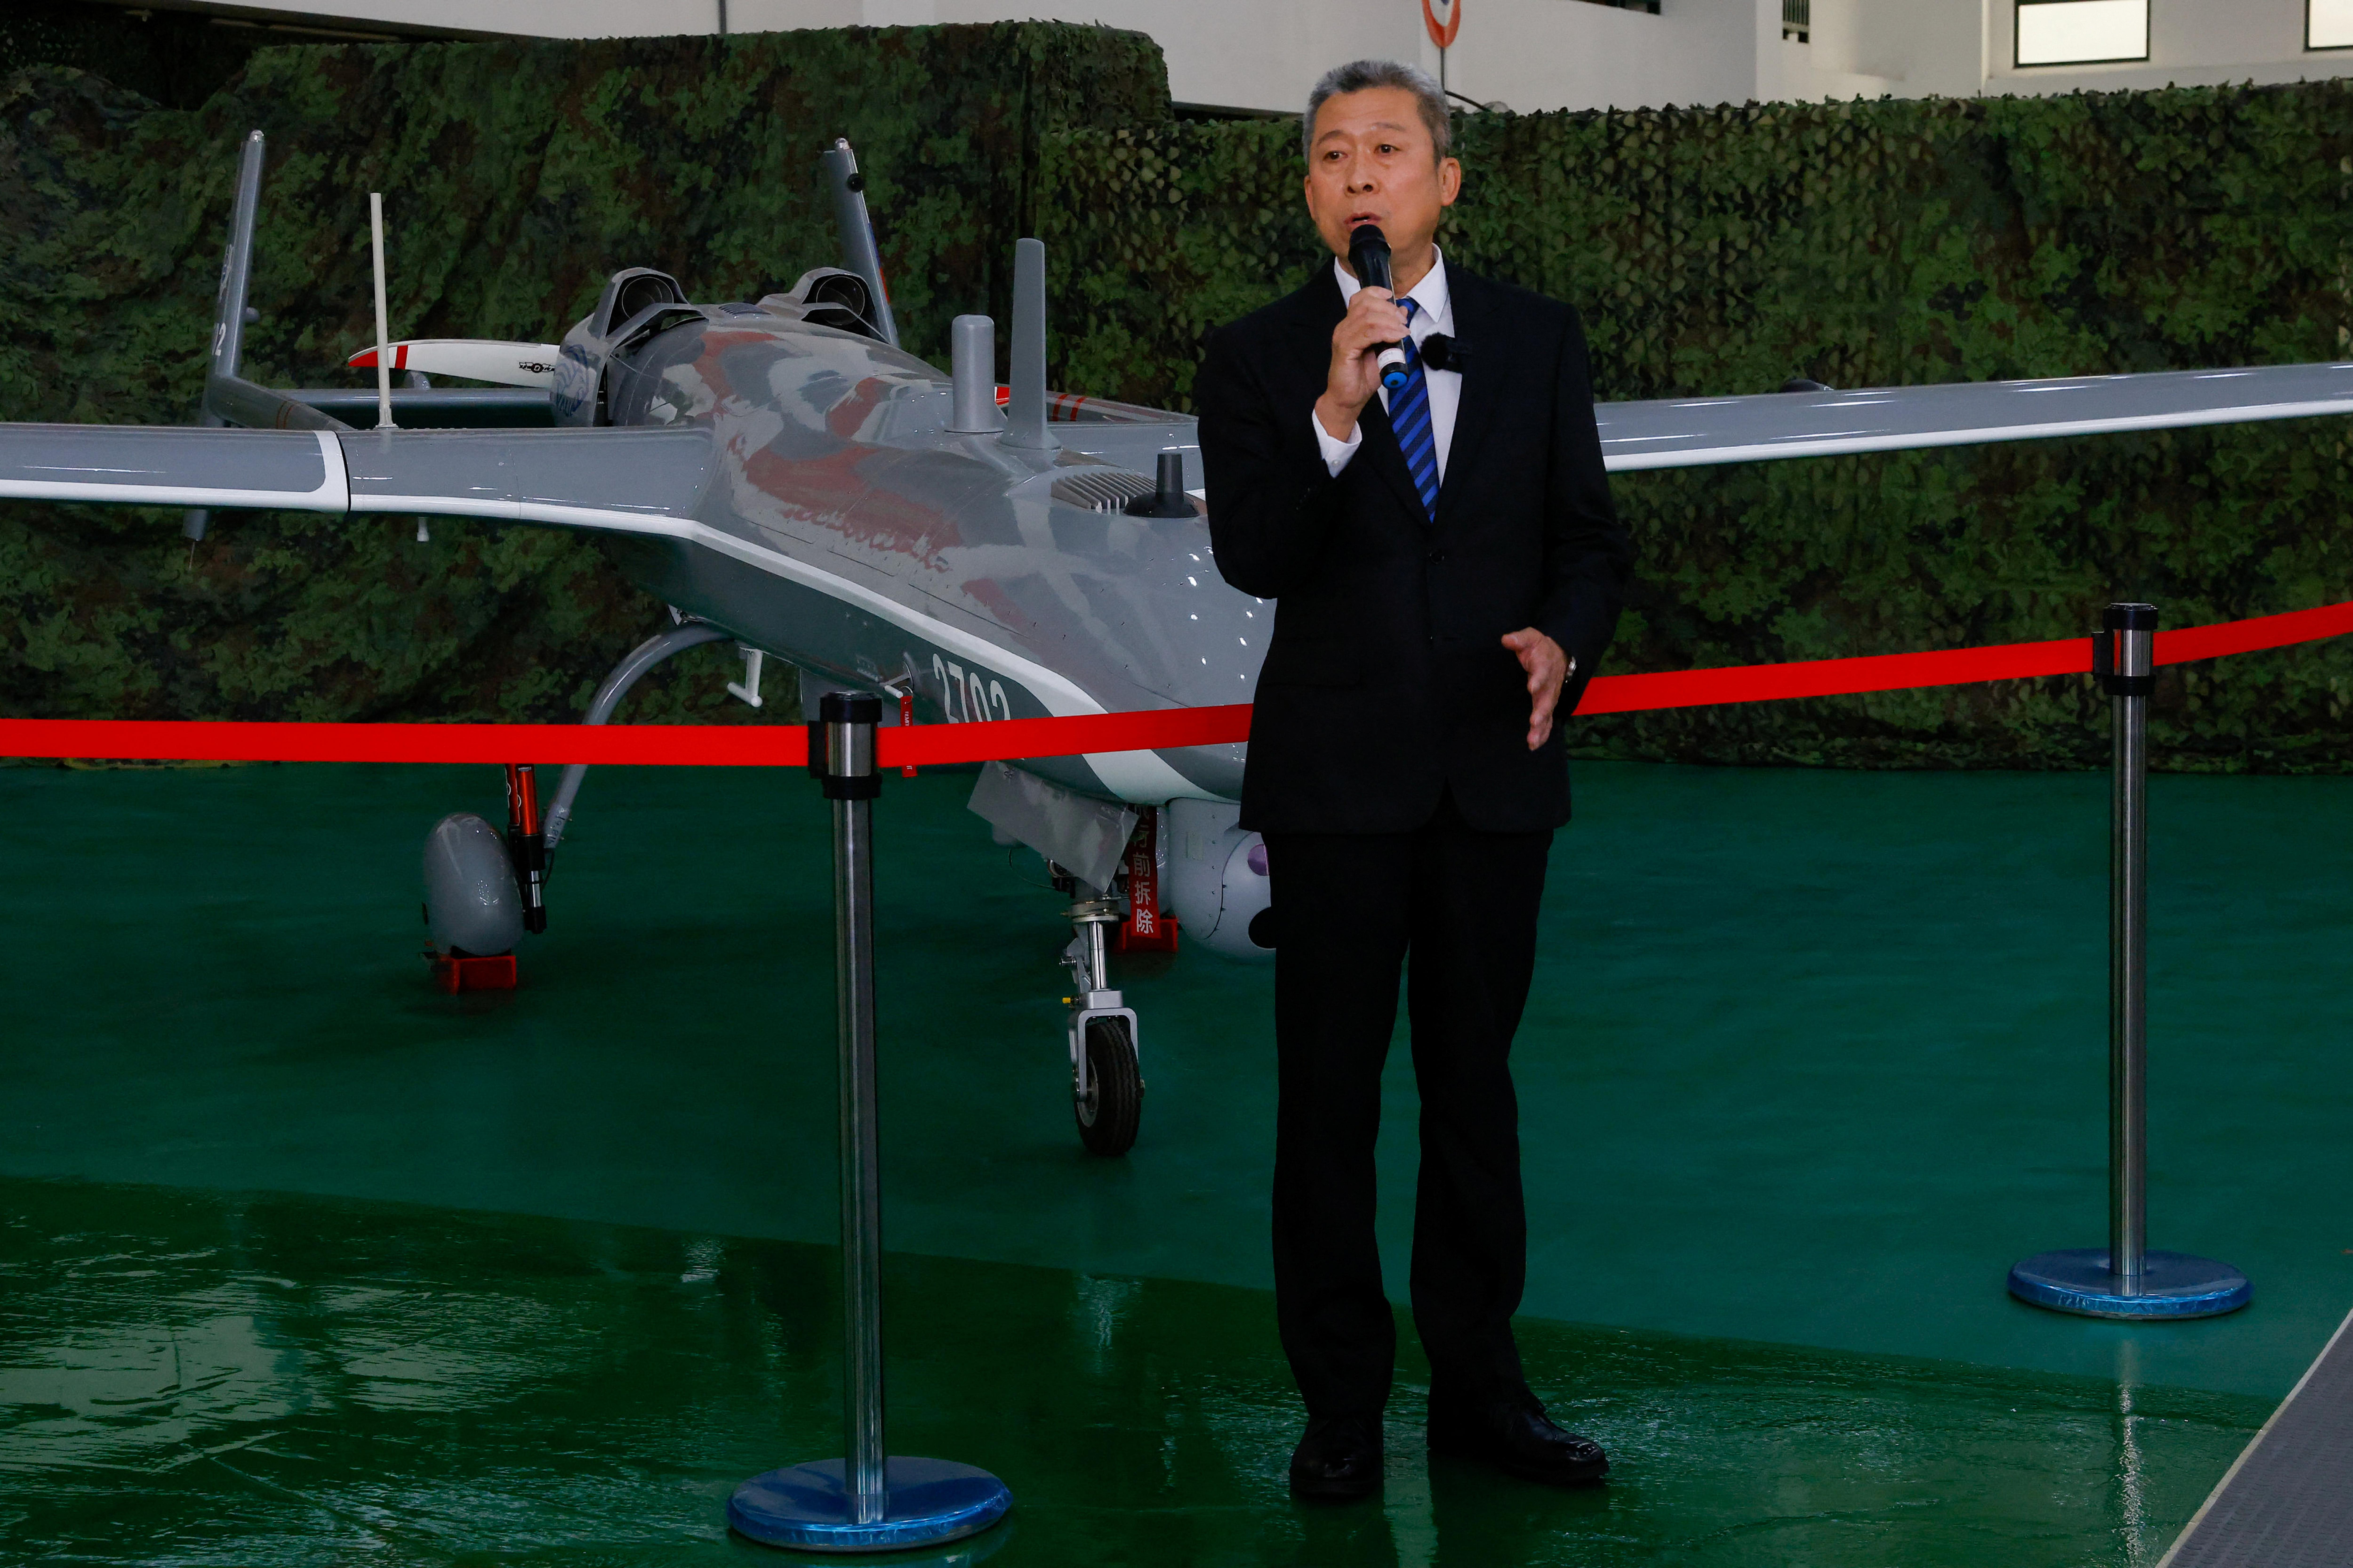 Taiwan's Defence Ministry showcases its domestically developed drones to the press in Taichung